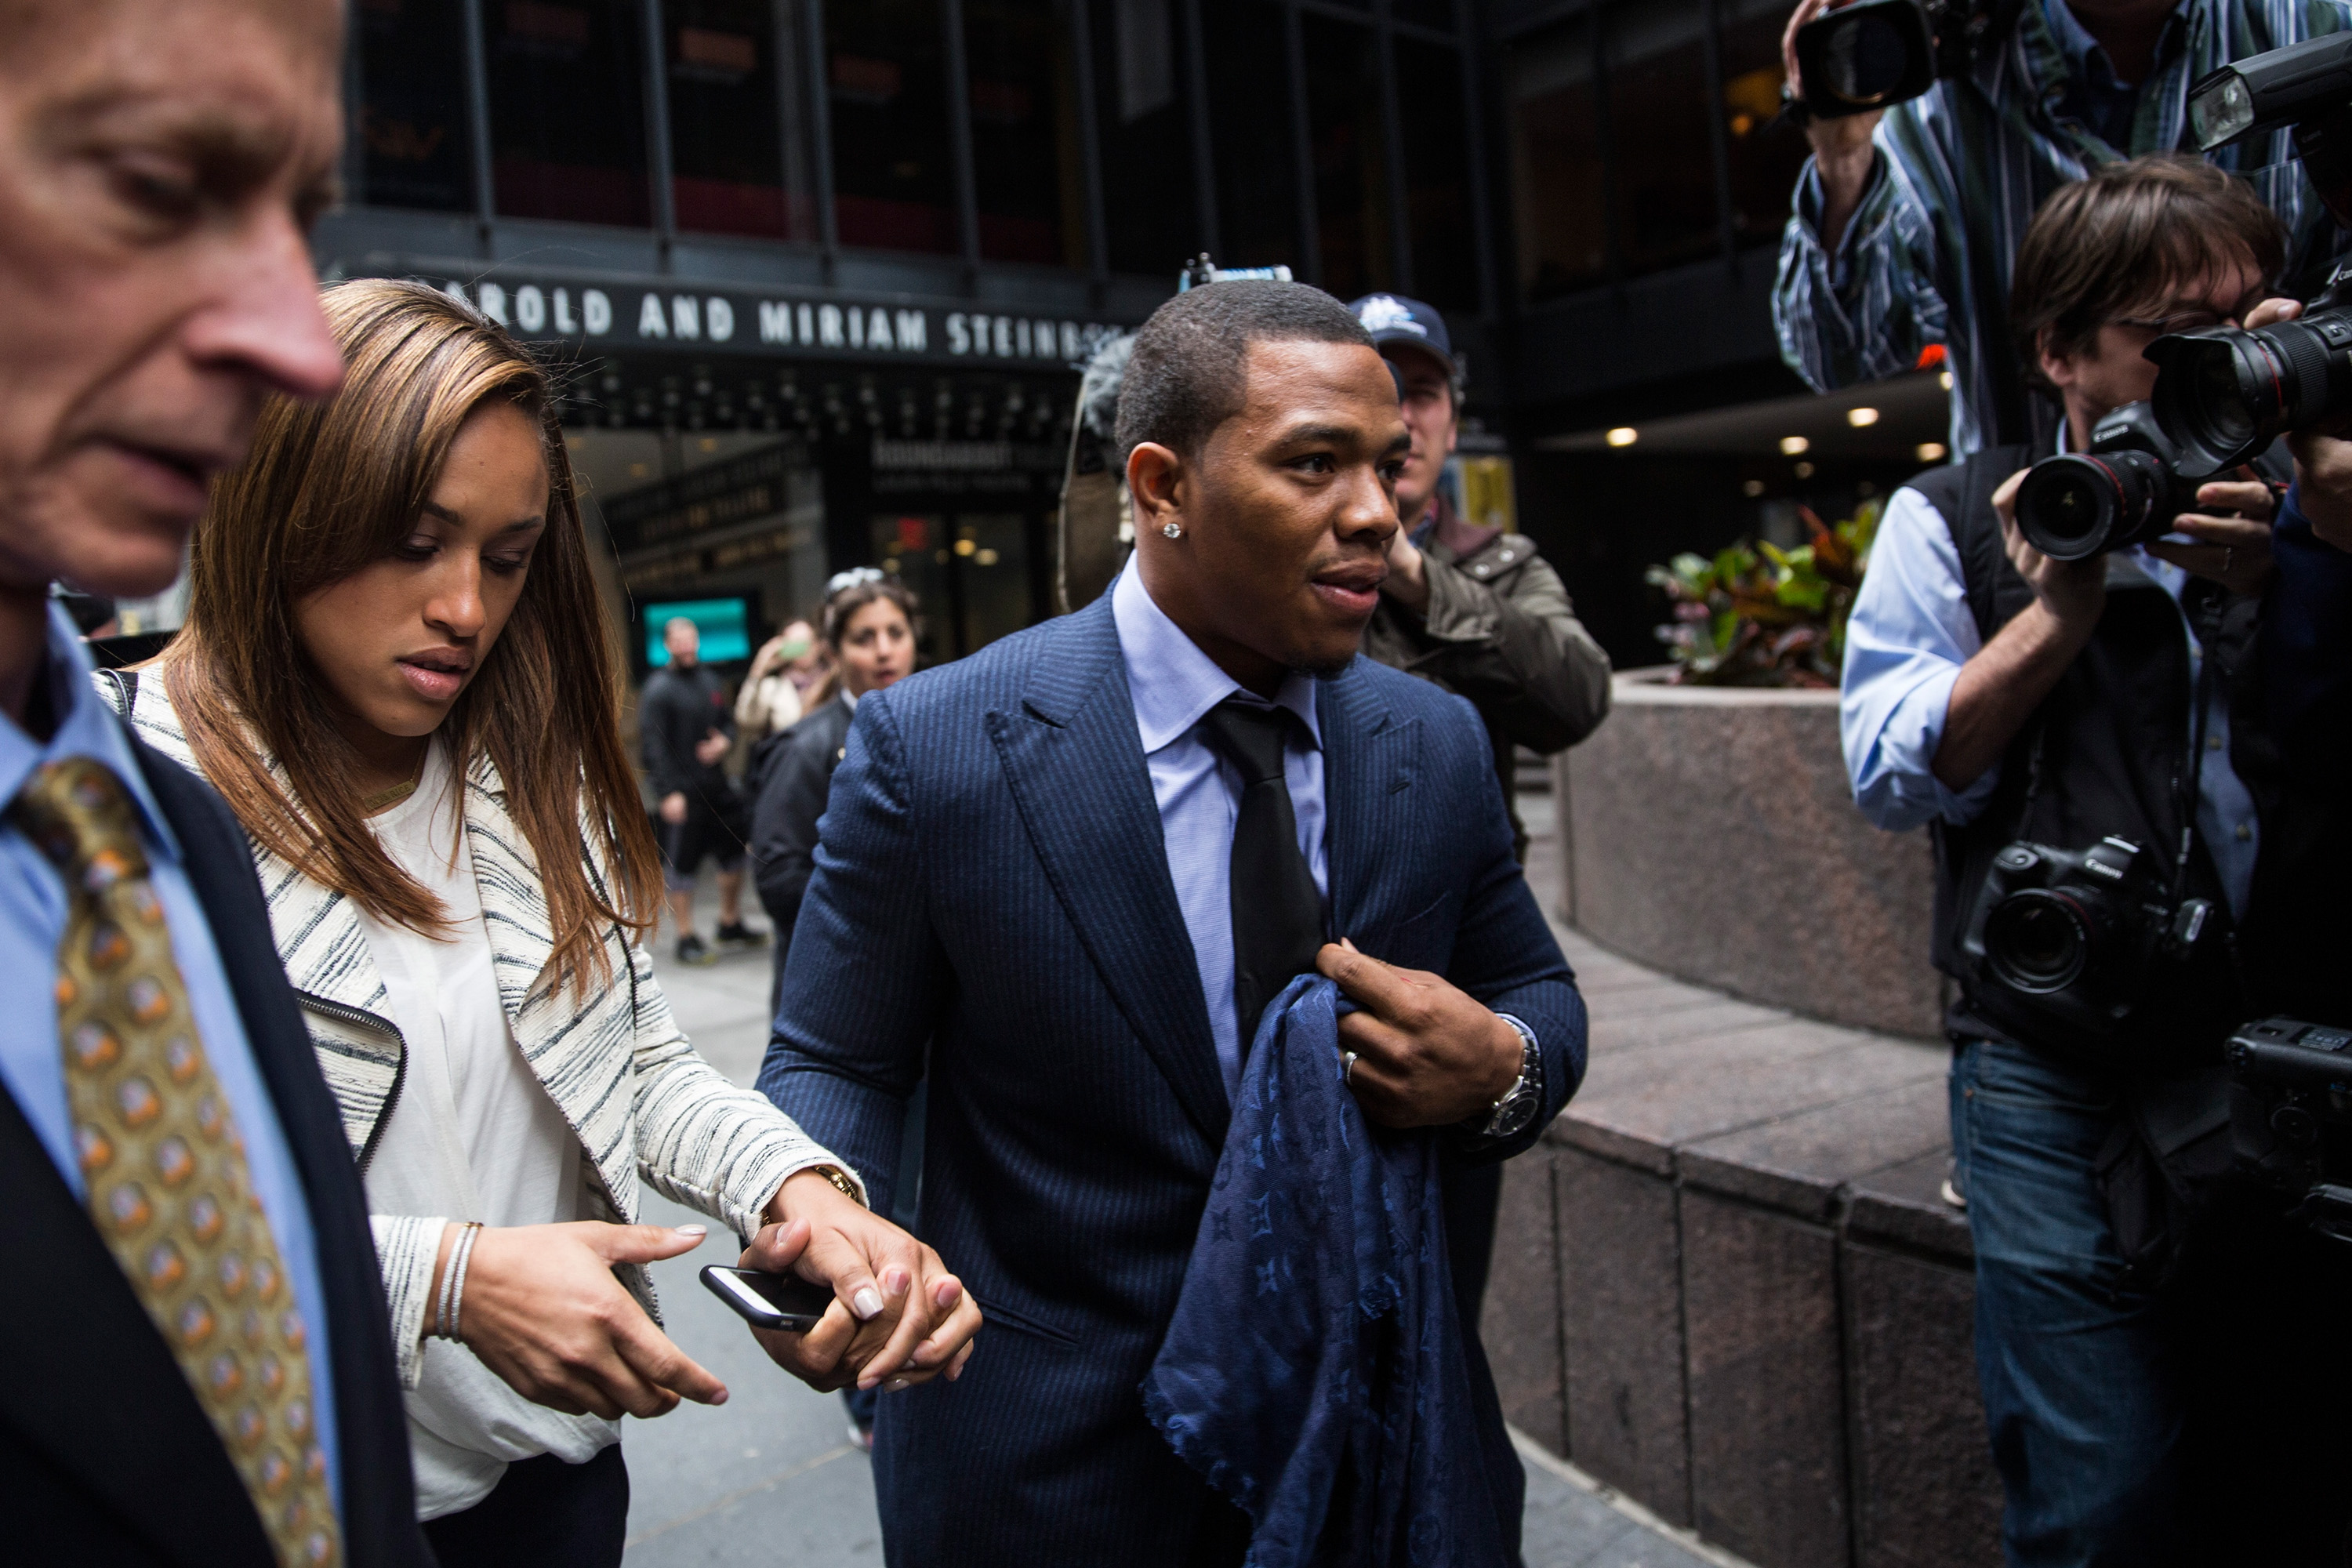 Suspended Baltimore Ravens football player Ray Rice and his wife Janay Palmer arrive for a hearing on Nov. 5, 2014 in New York City. (Andrew Burton—Getty Images)